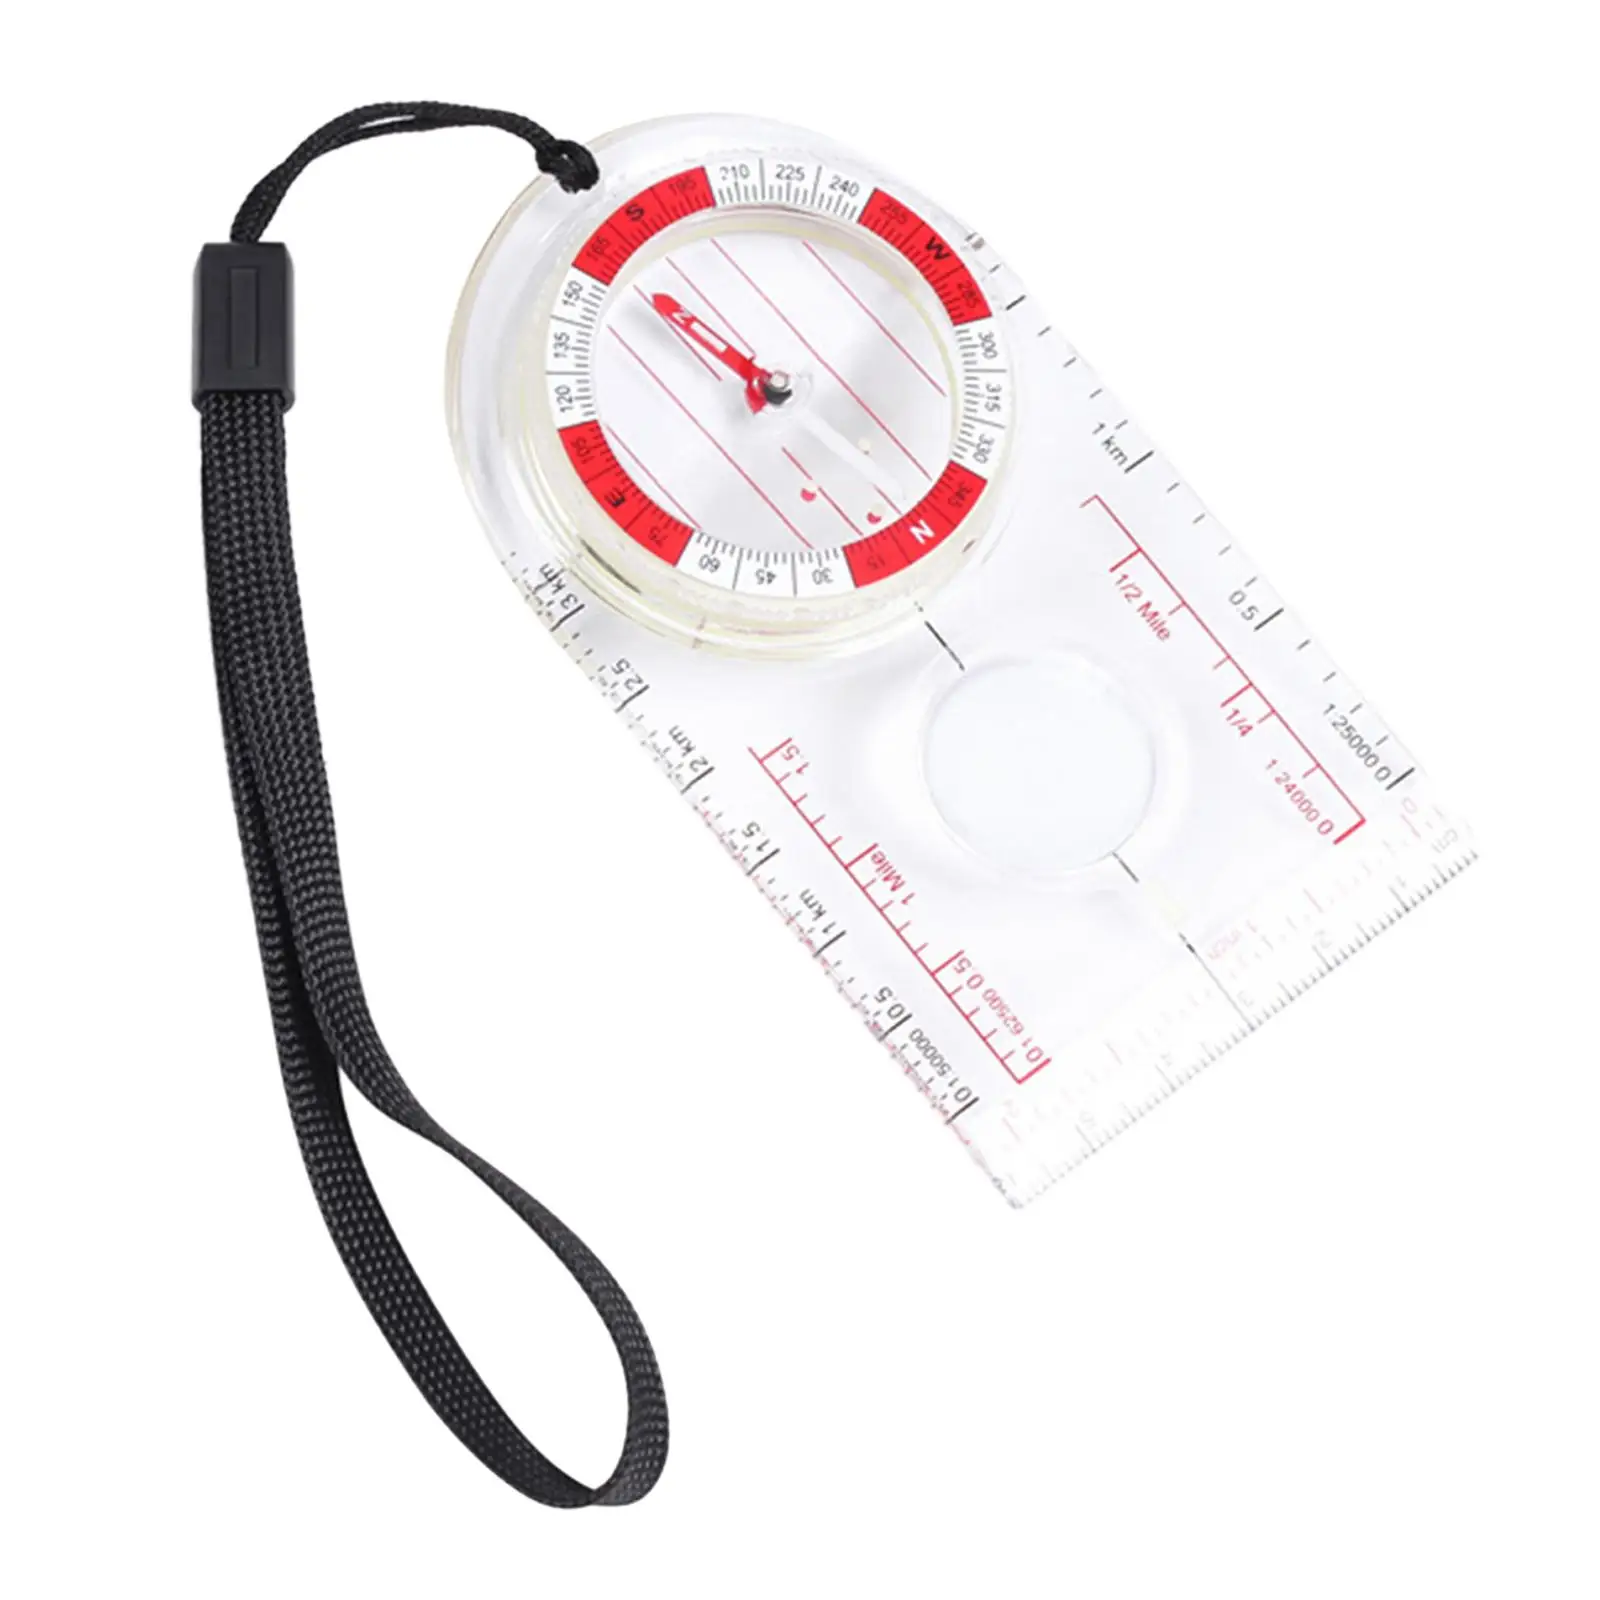 Orienteering Compass Waterproof Compass Competition for Outdoor Sports Training Hiking Survival Reading Boating